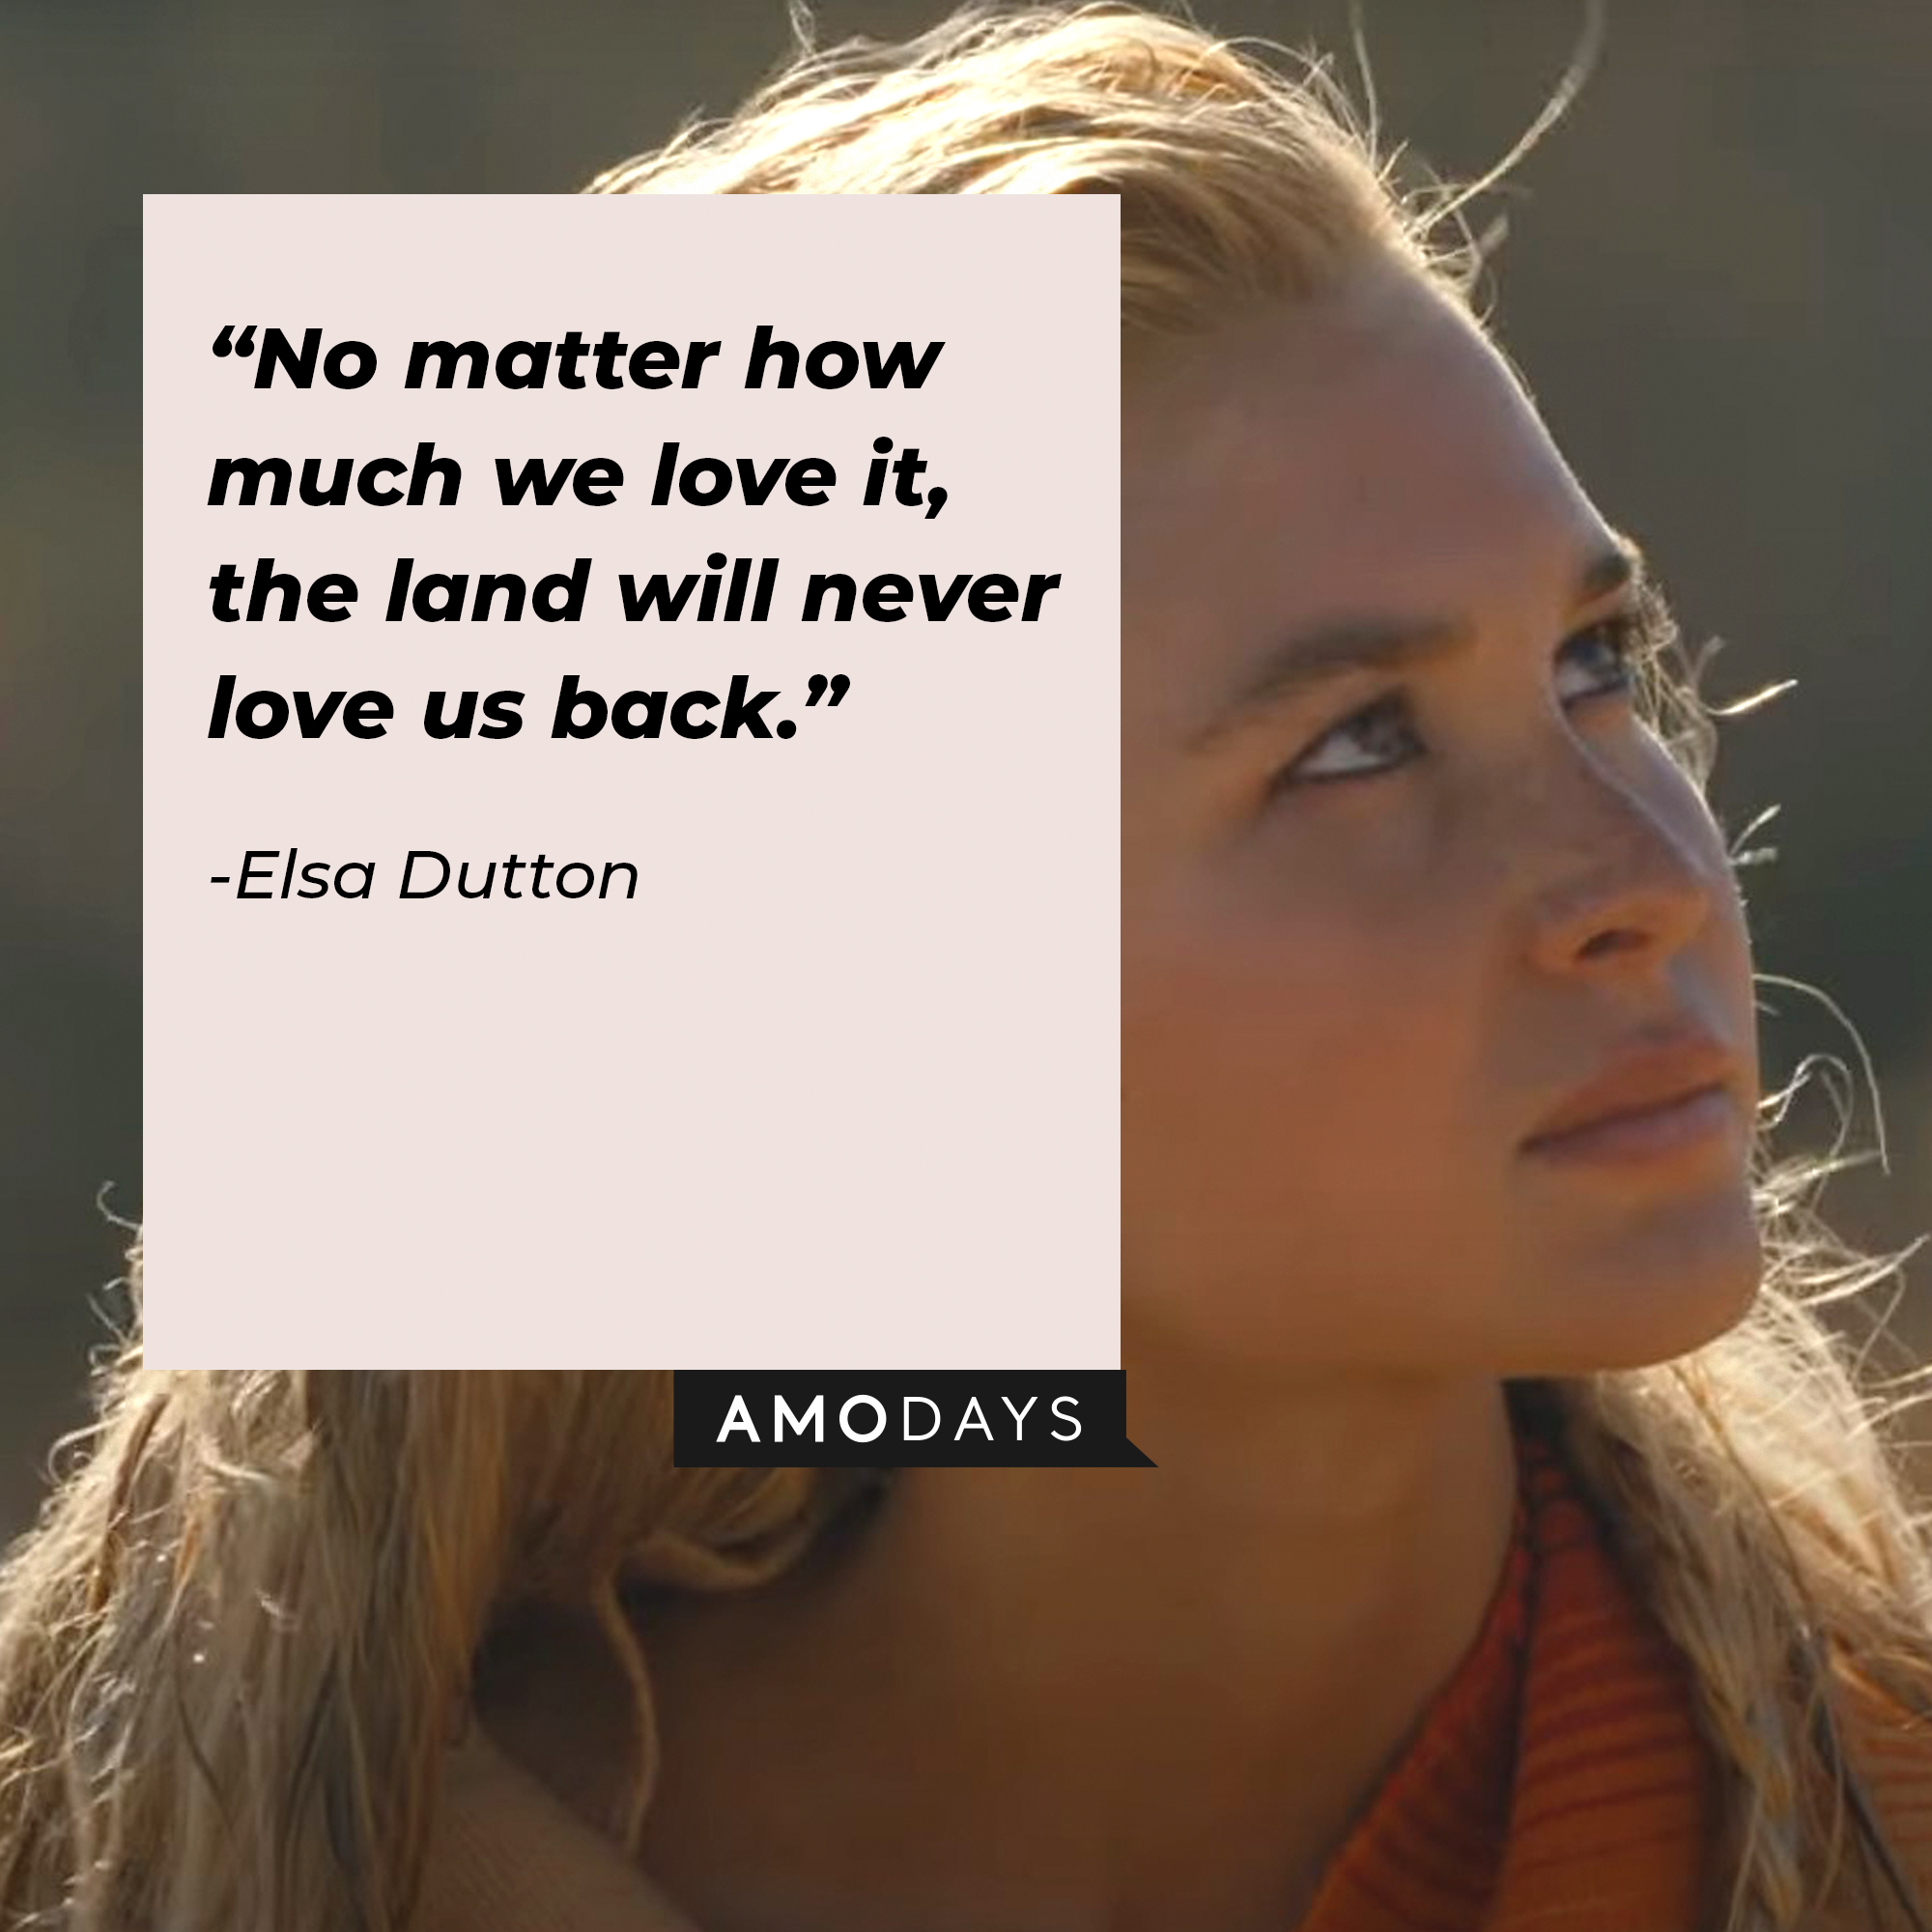 An image of Elsa Dutton with her quote: “No matter how much we love it, the land will never love us back.”┃Source: youtube.com/yellowstone